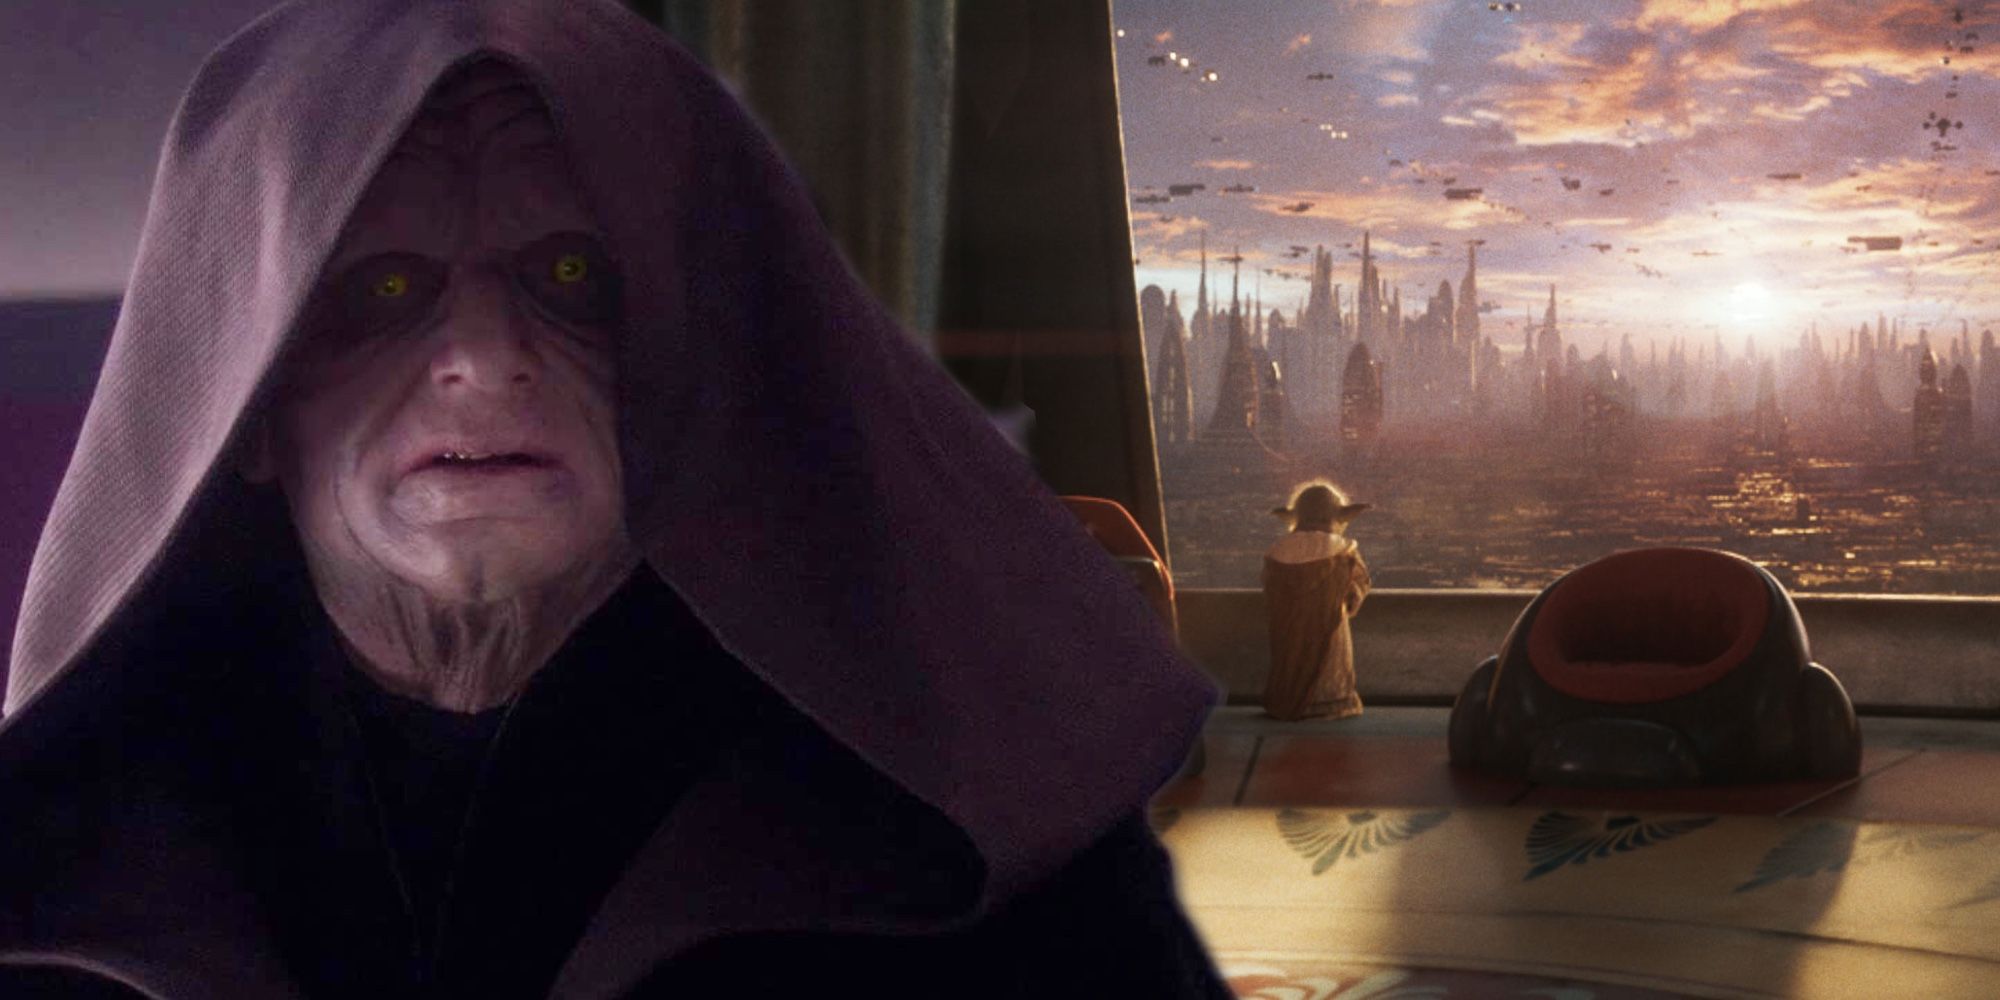 star wars palpatine quote perfectly explains fall of jedi order yoda